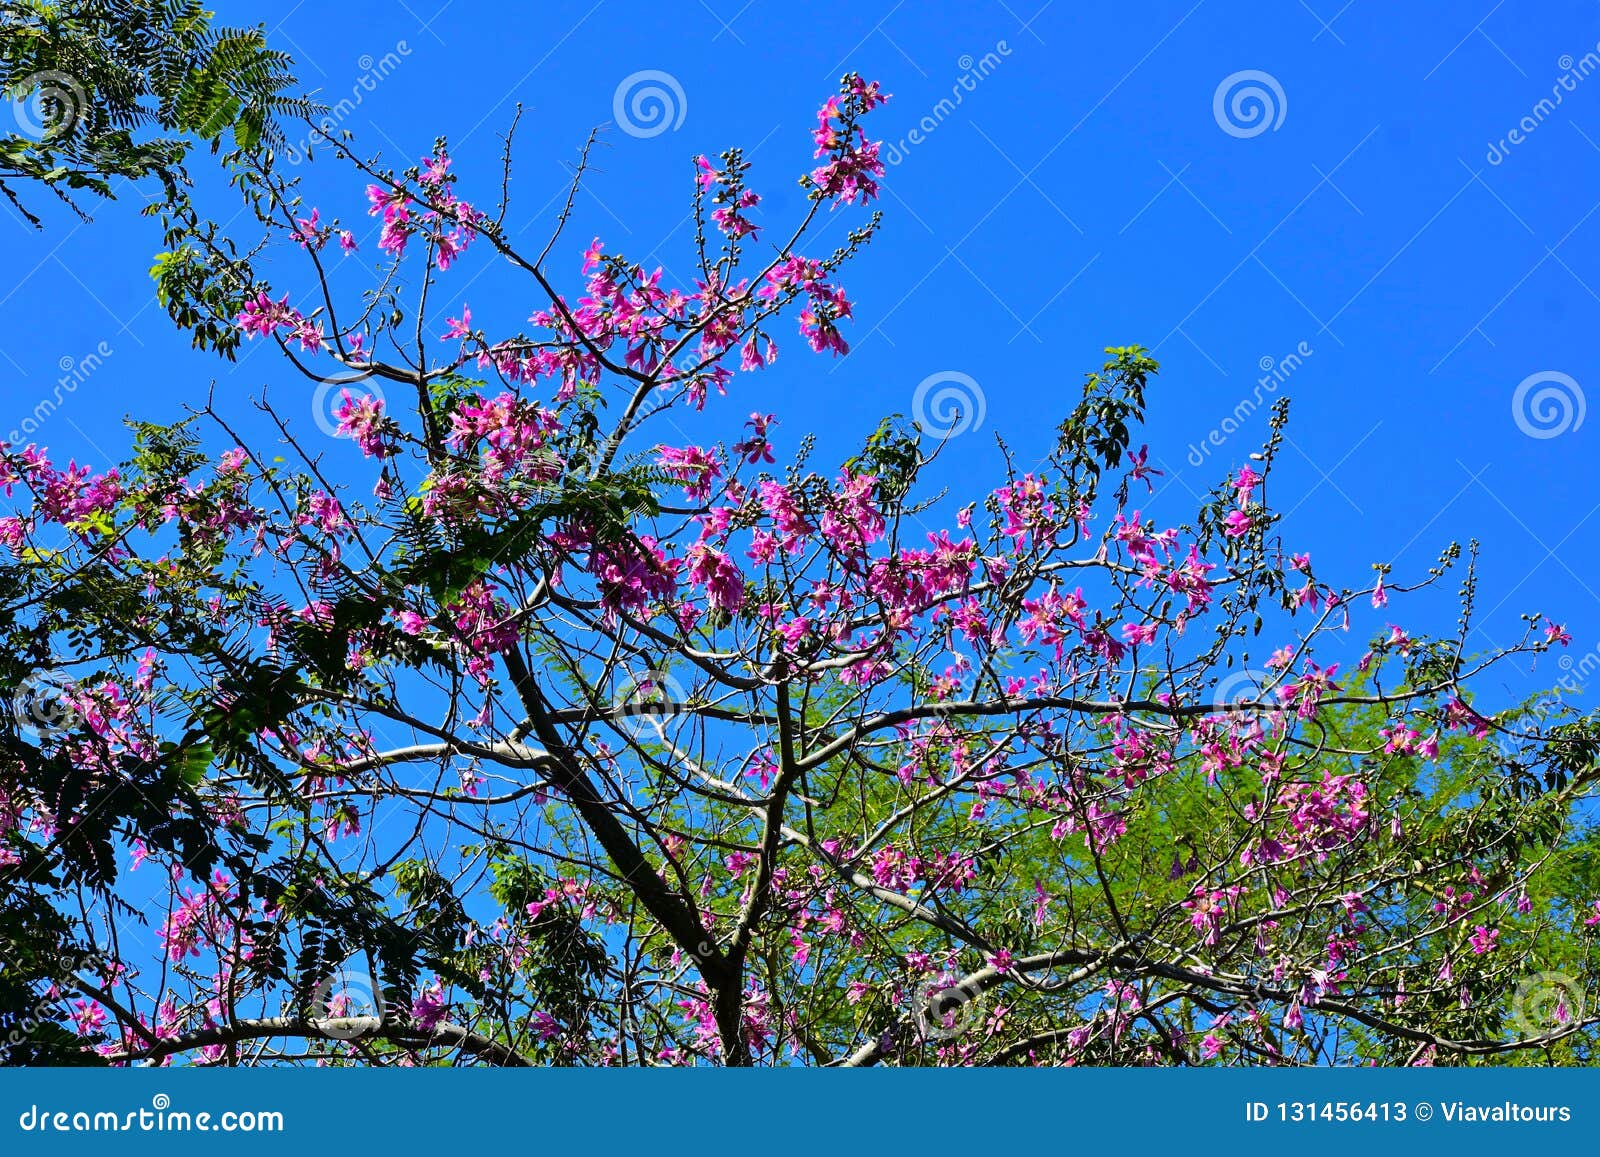 Top View Of Beatiful Tree With Magenta Flowers At Bush Gardens